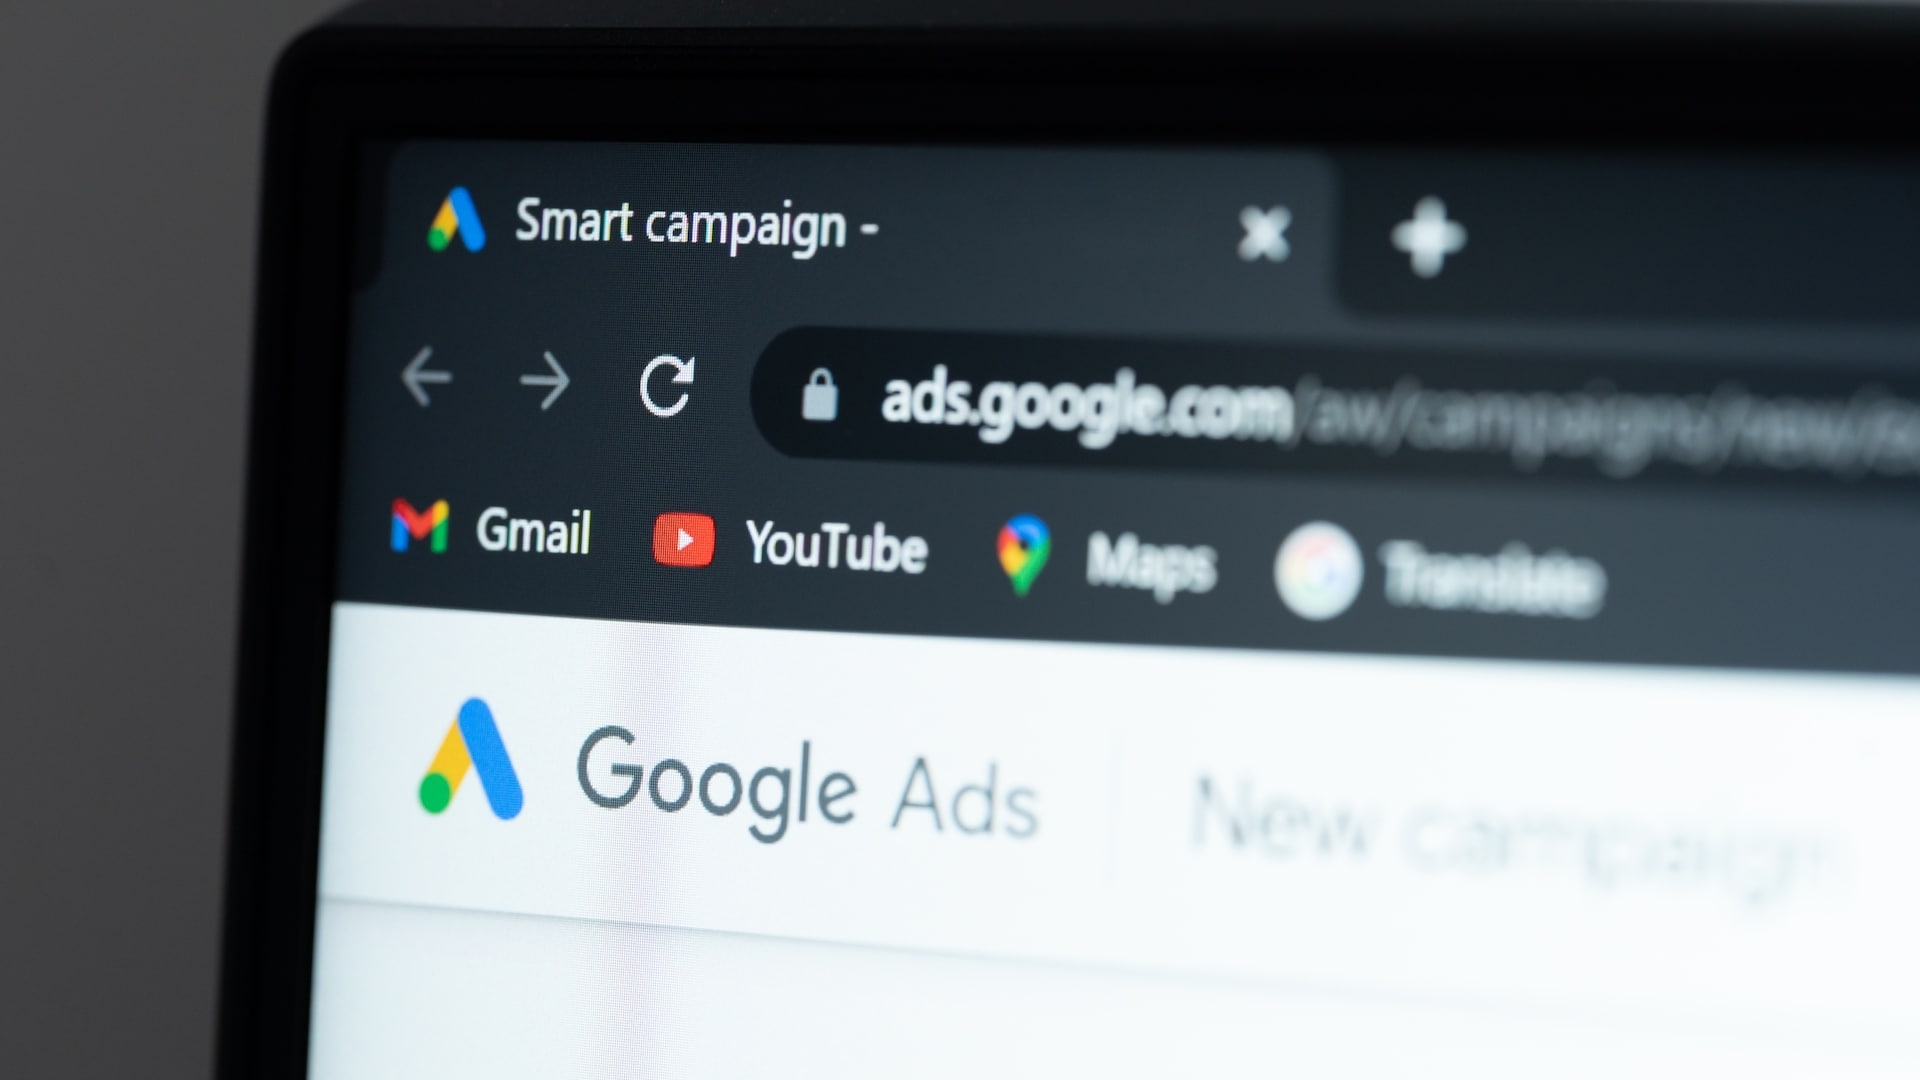 #Google Ads updates gambling and games policy